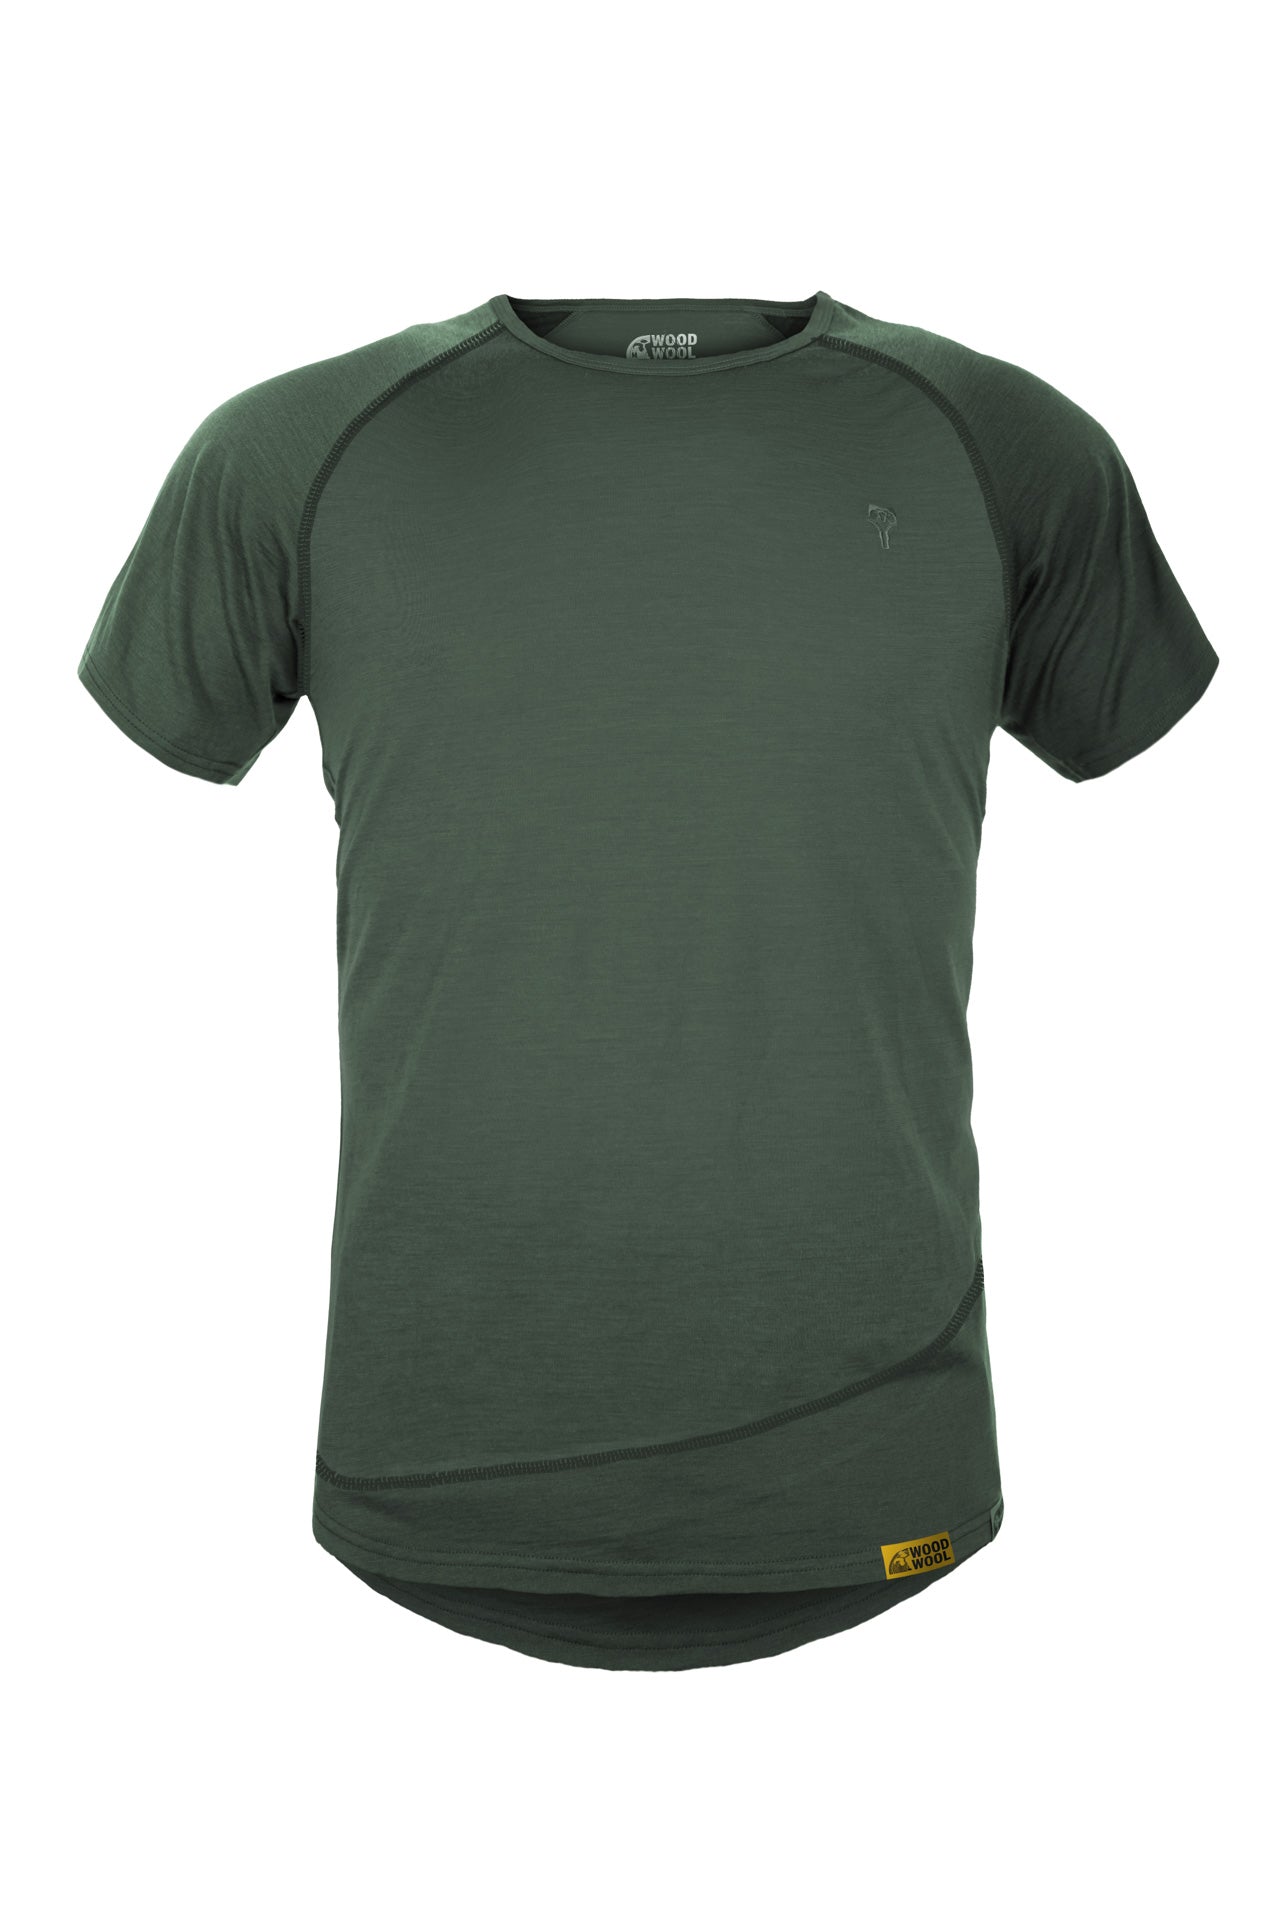 WoodWool T-Shirt Mr. Pike  - Bayberry Green